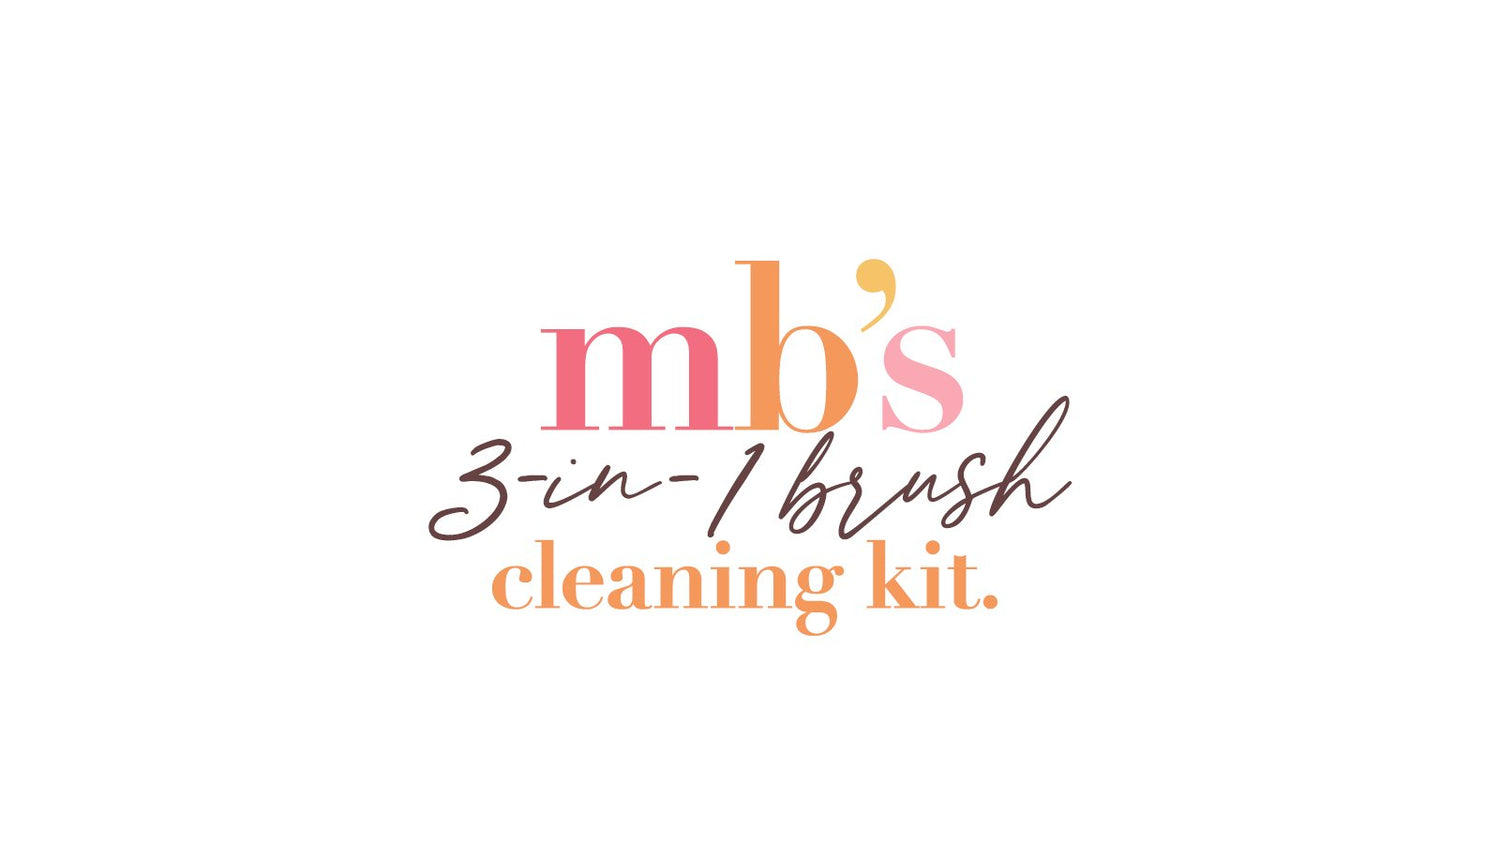 mb's 3-in-1 brush cleaning first aid kit.